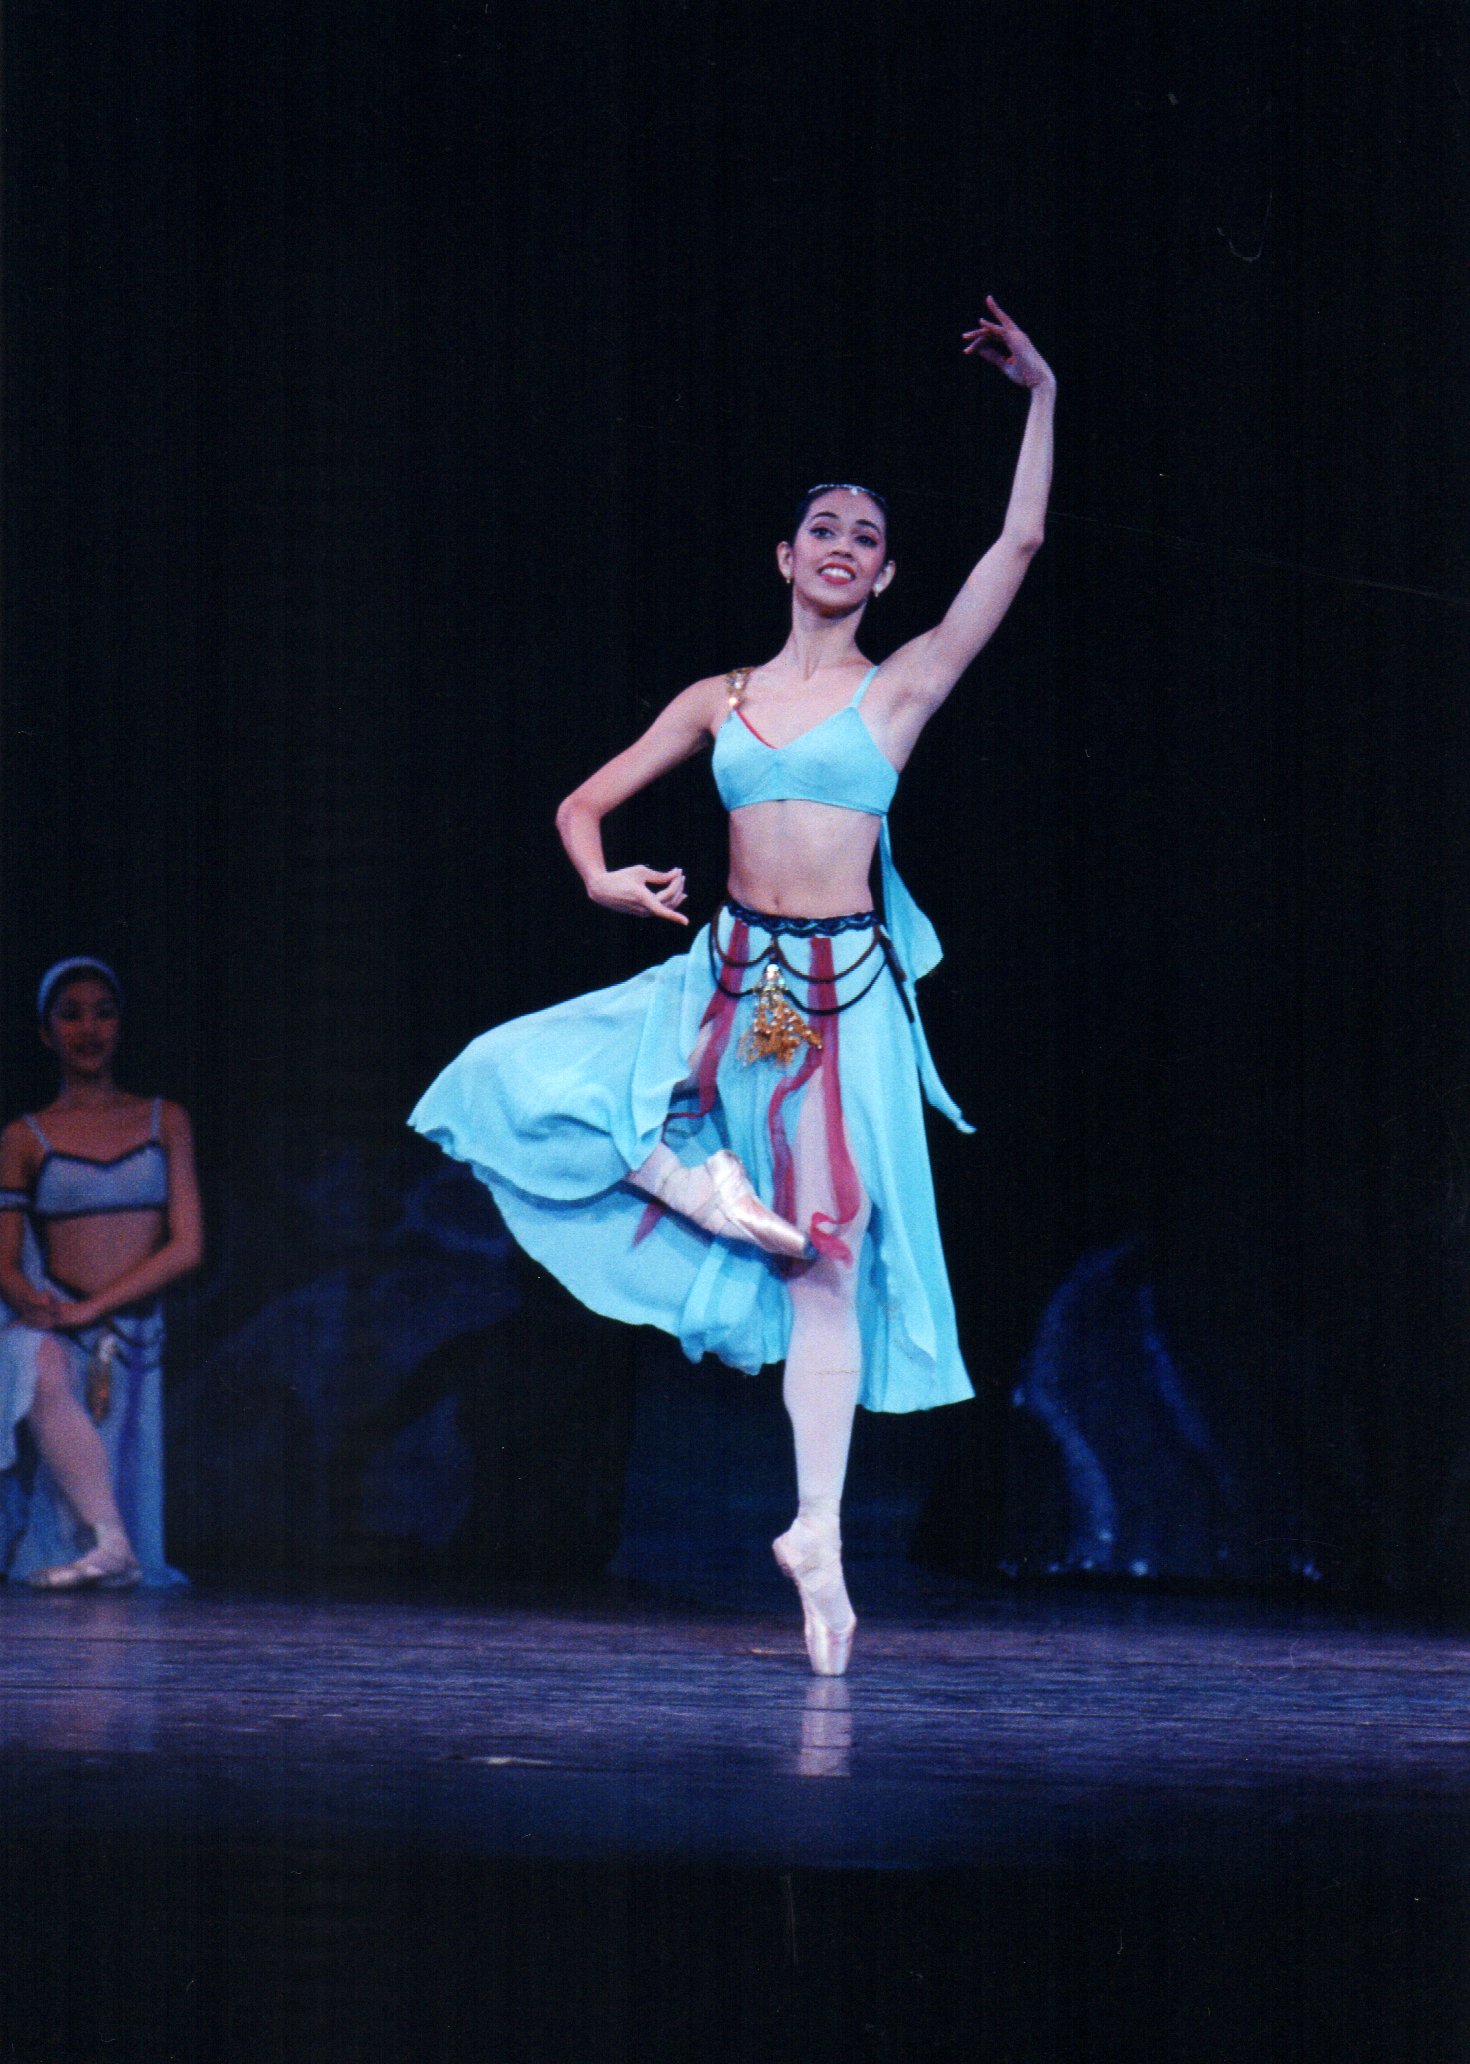    Aqua is the appropriate hue for Elline Damian as she performs as Medora, the female lead in  Le Corsaire  (2002), involving the improbable adventures of the pirate Conrad who rescues her twice from kidnappers. Photo by Ocs Alvarez   